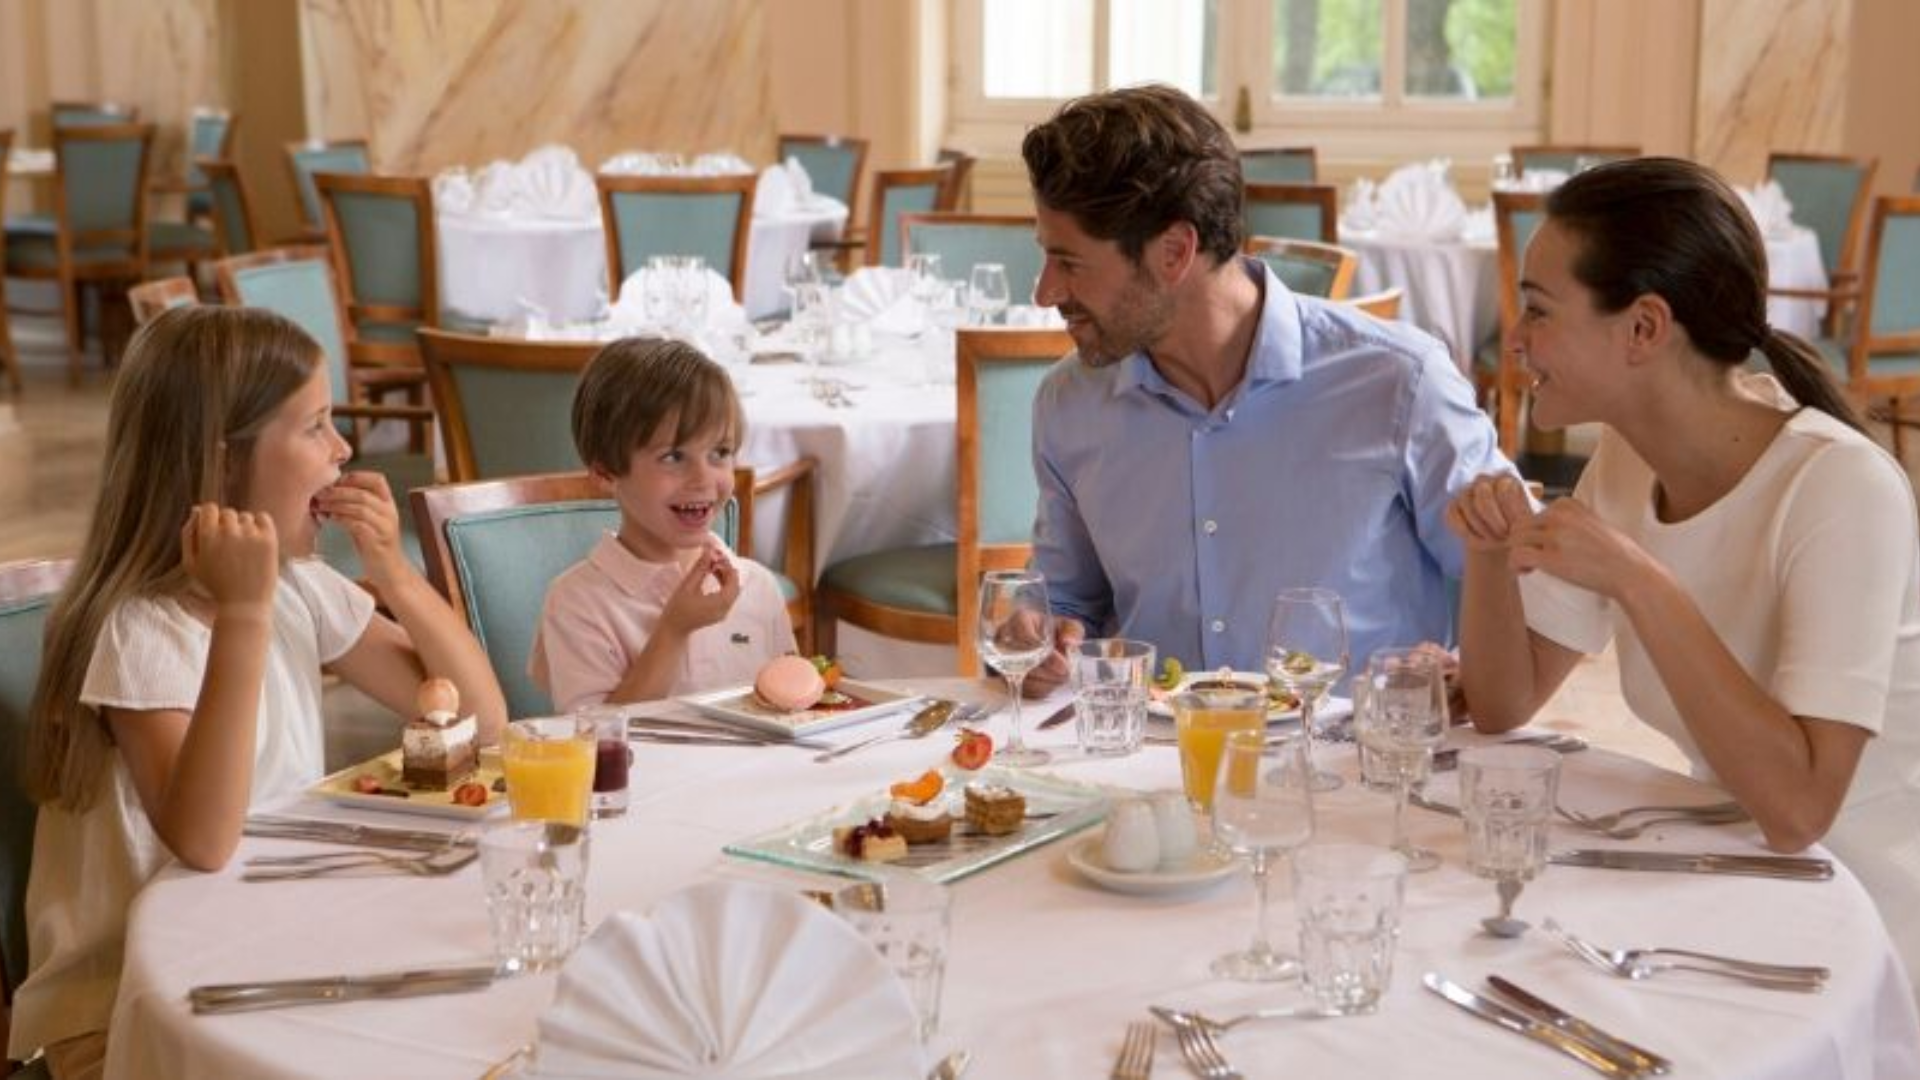 Food for Family Restaurant a Top Choice for Gatherings